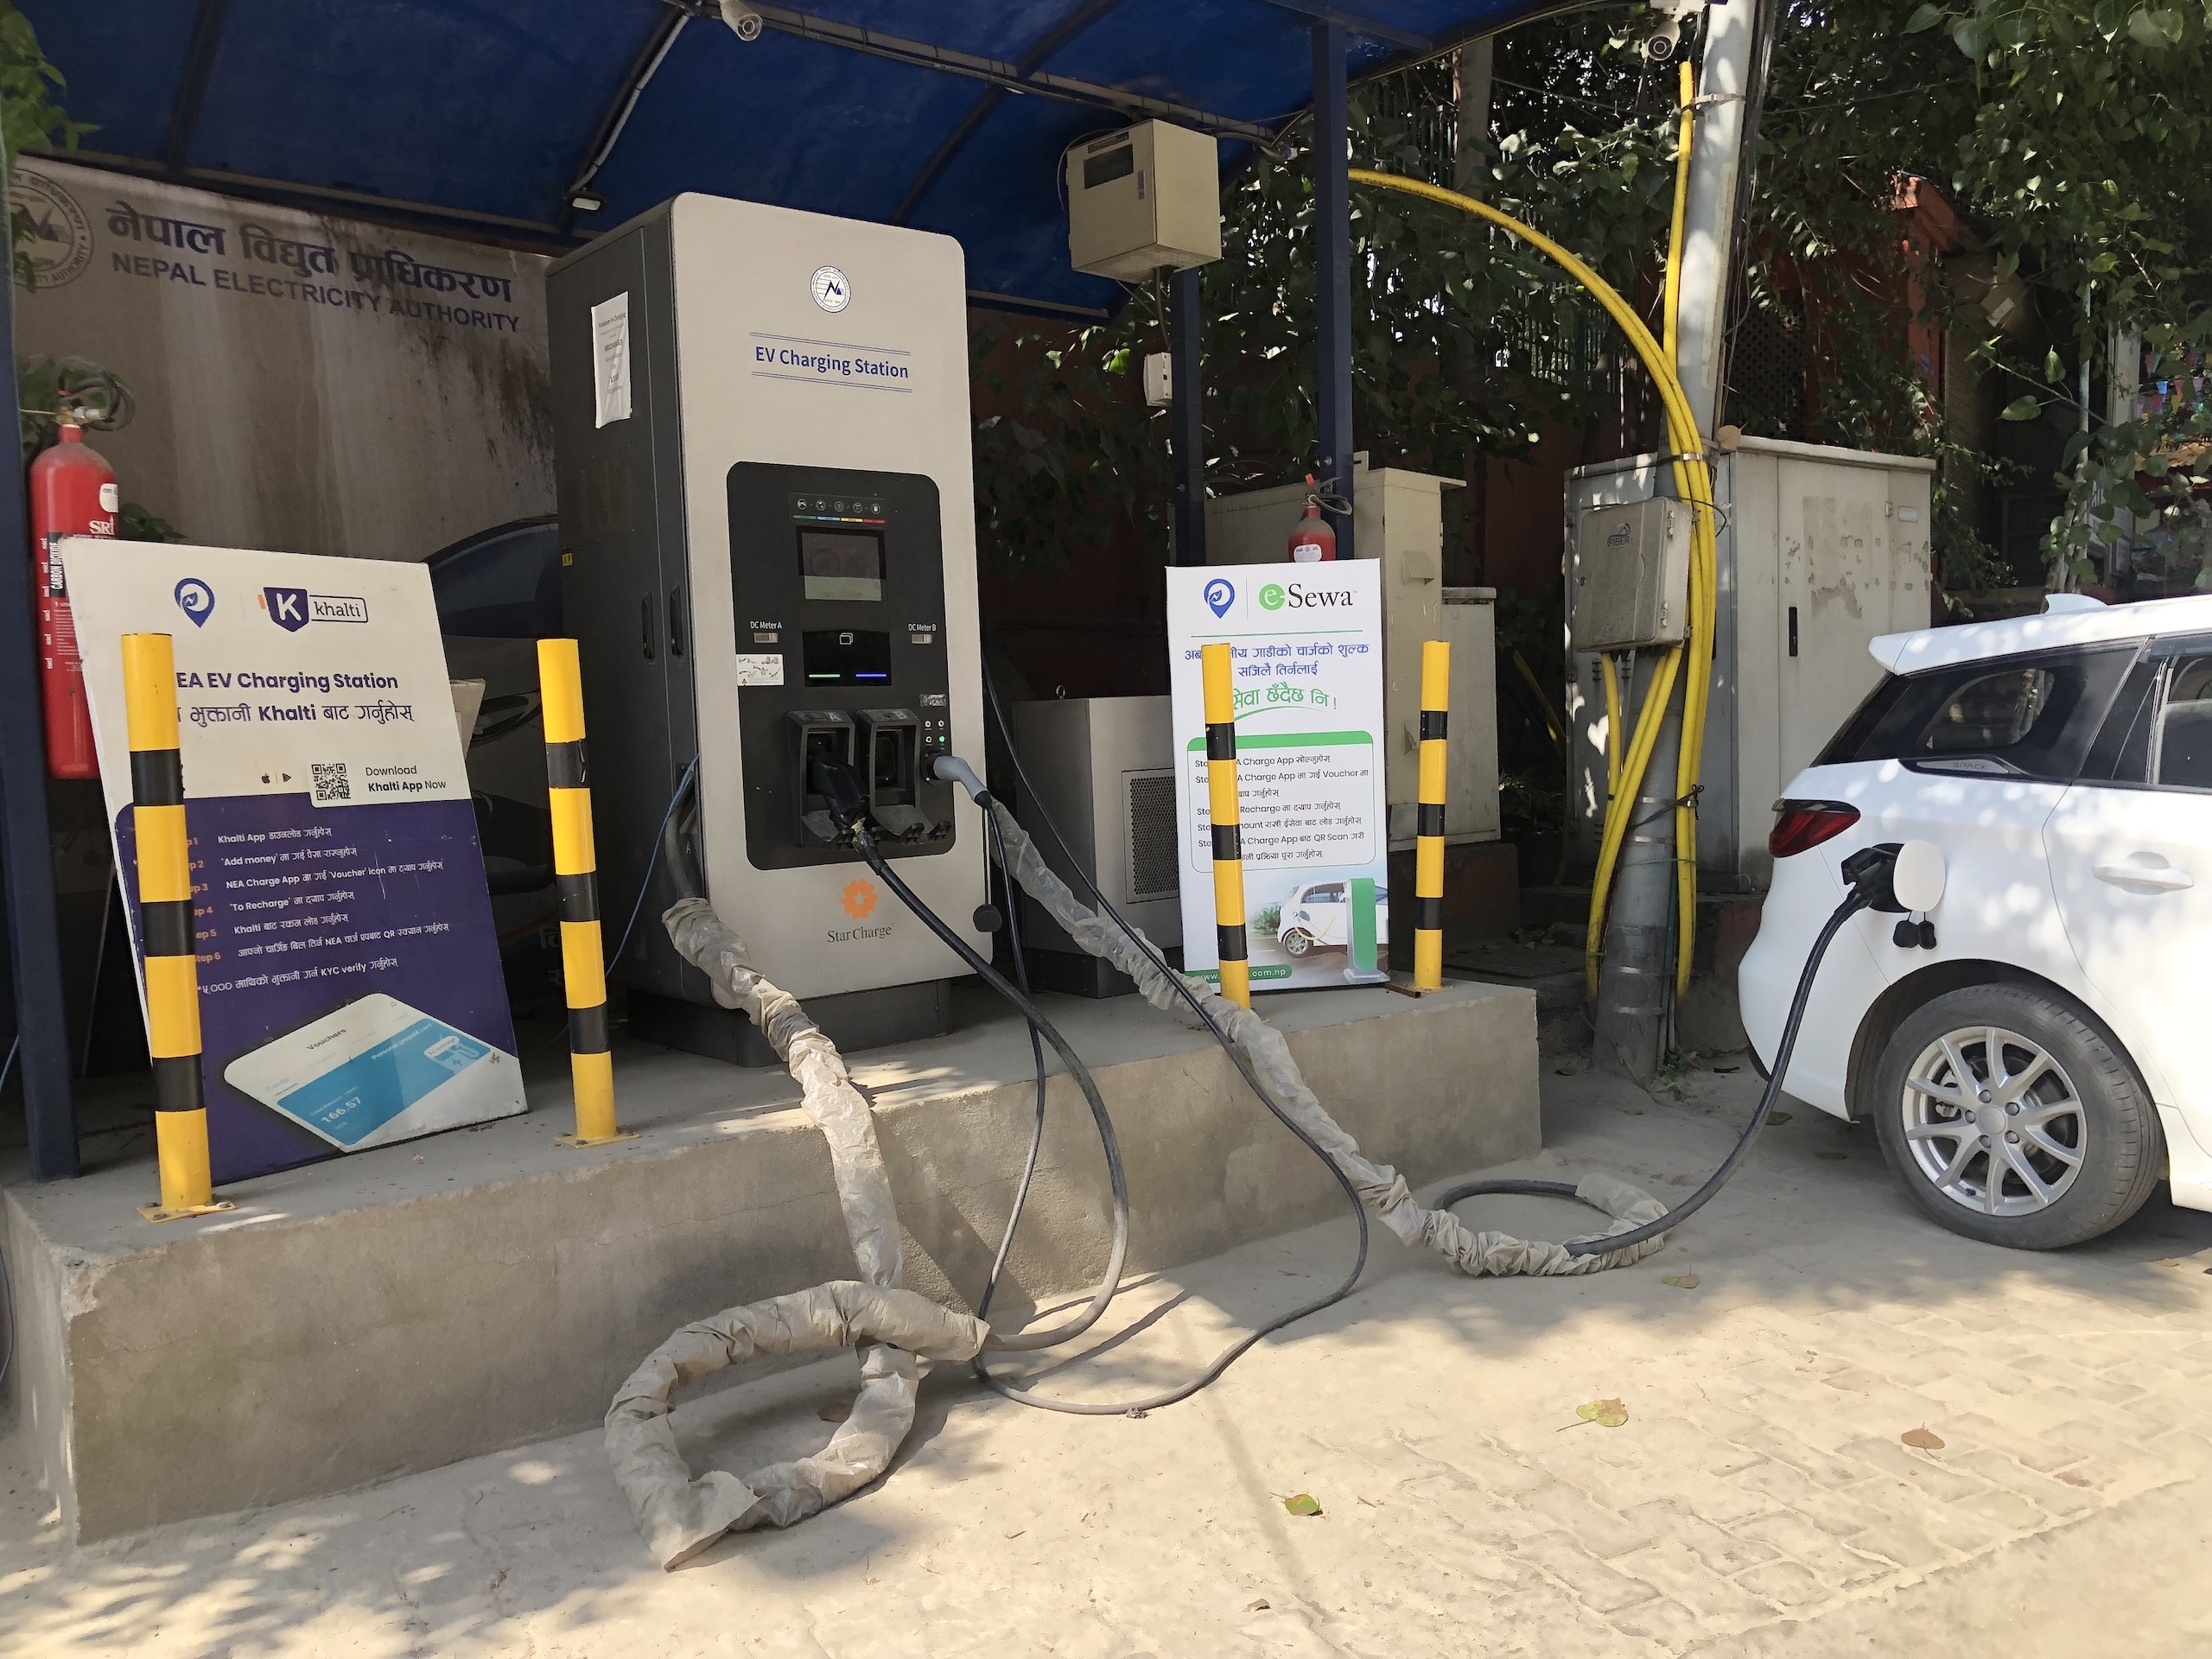 A white car plugged into an electric vehicle (EV) charging station